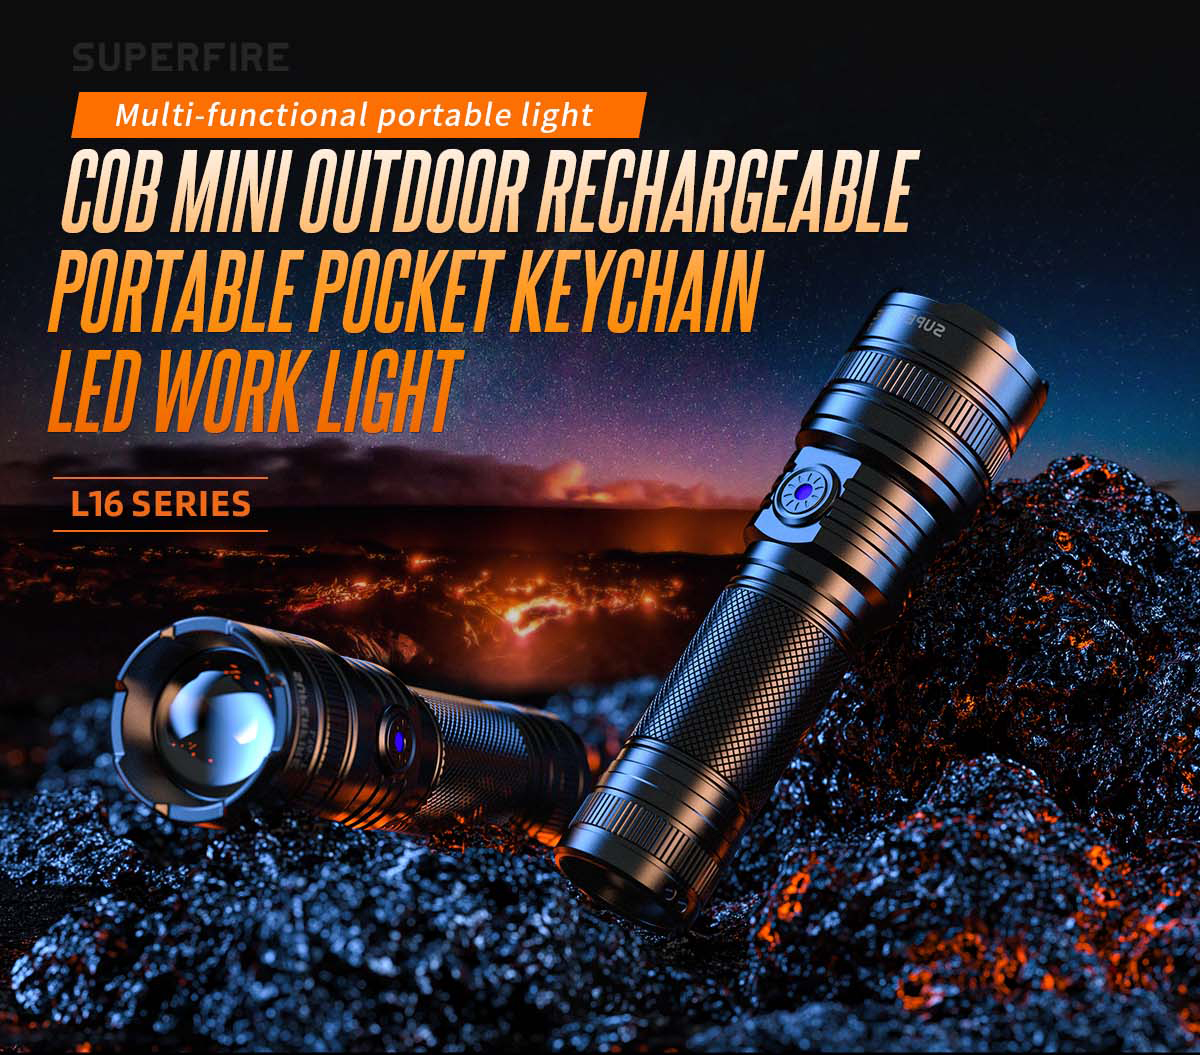 A New Flashlight Company Puts The Focus On Tactical Applications